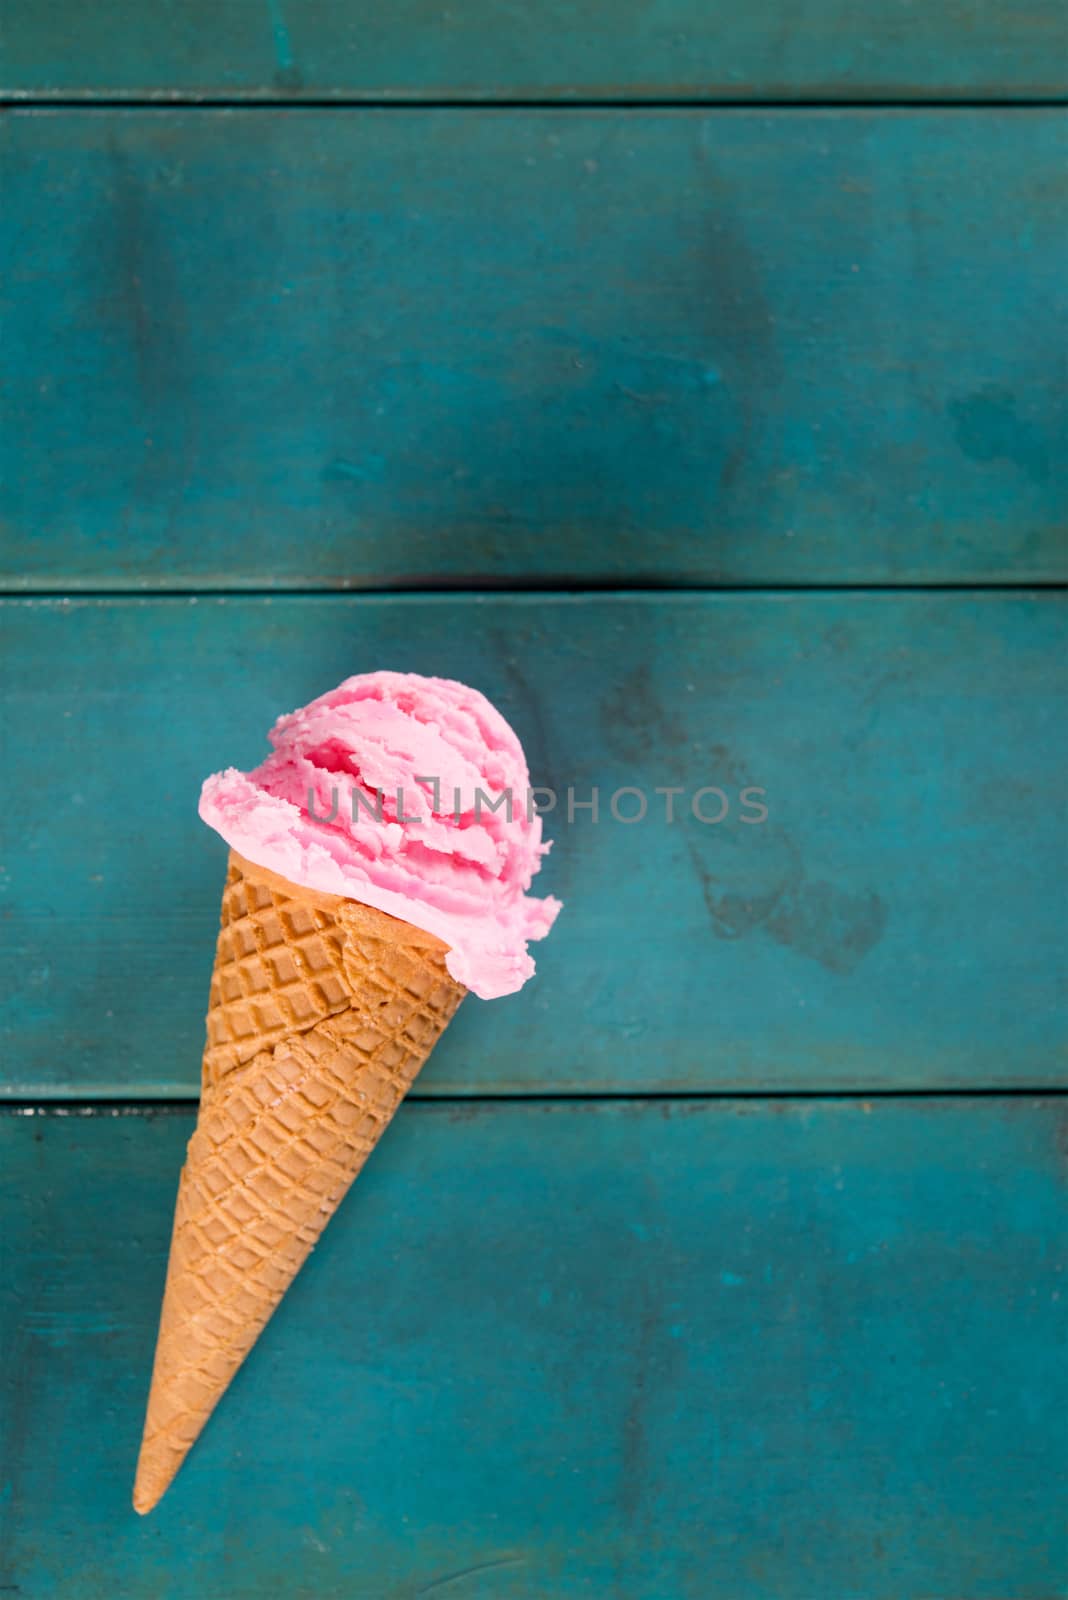 Strawberry ice cream in blue with space by szefei